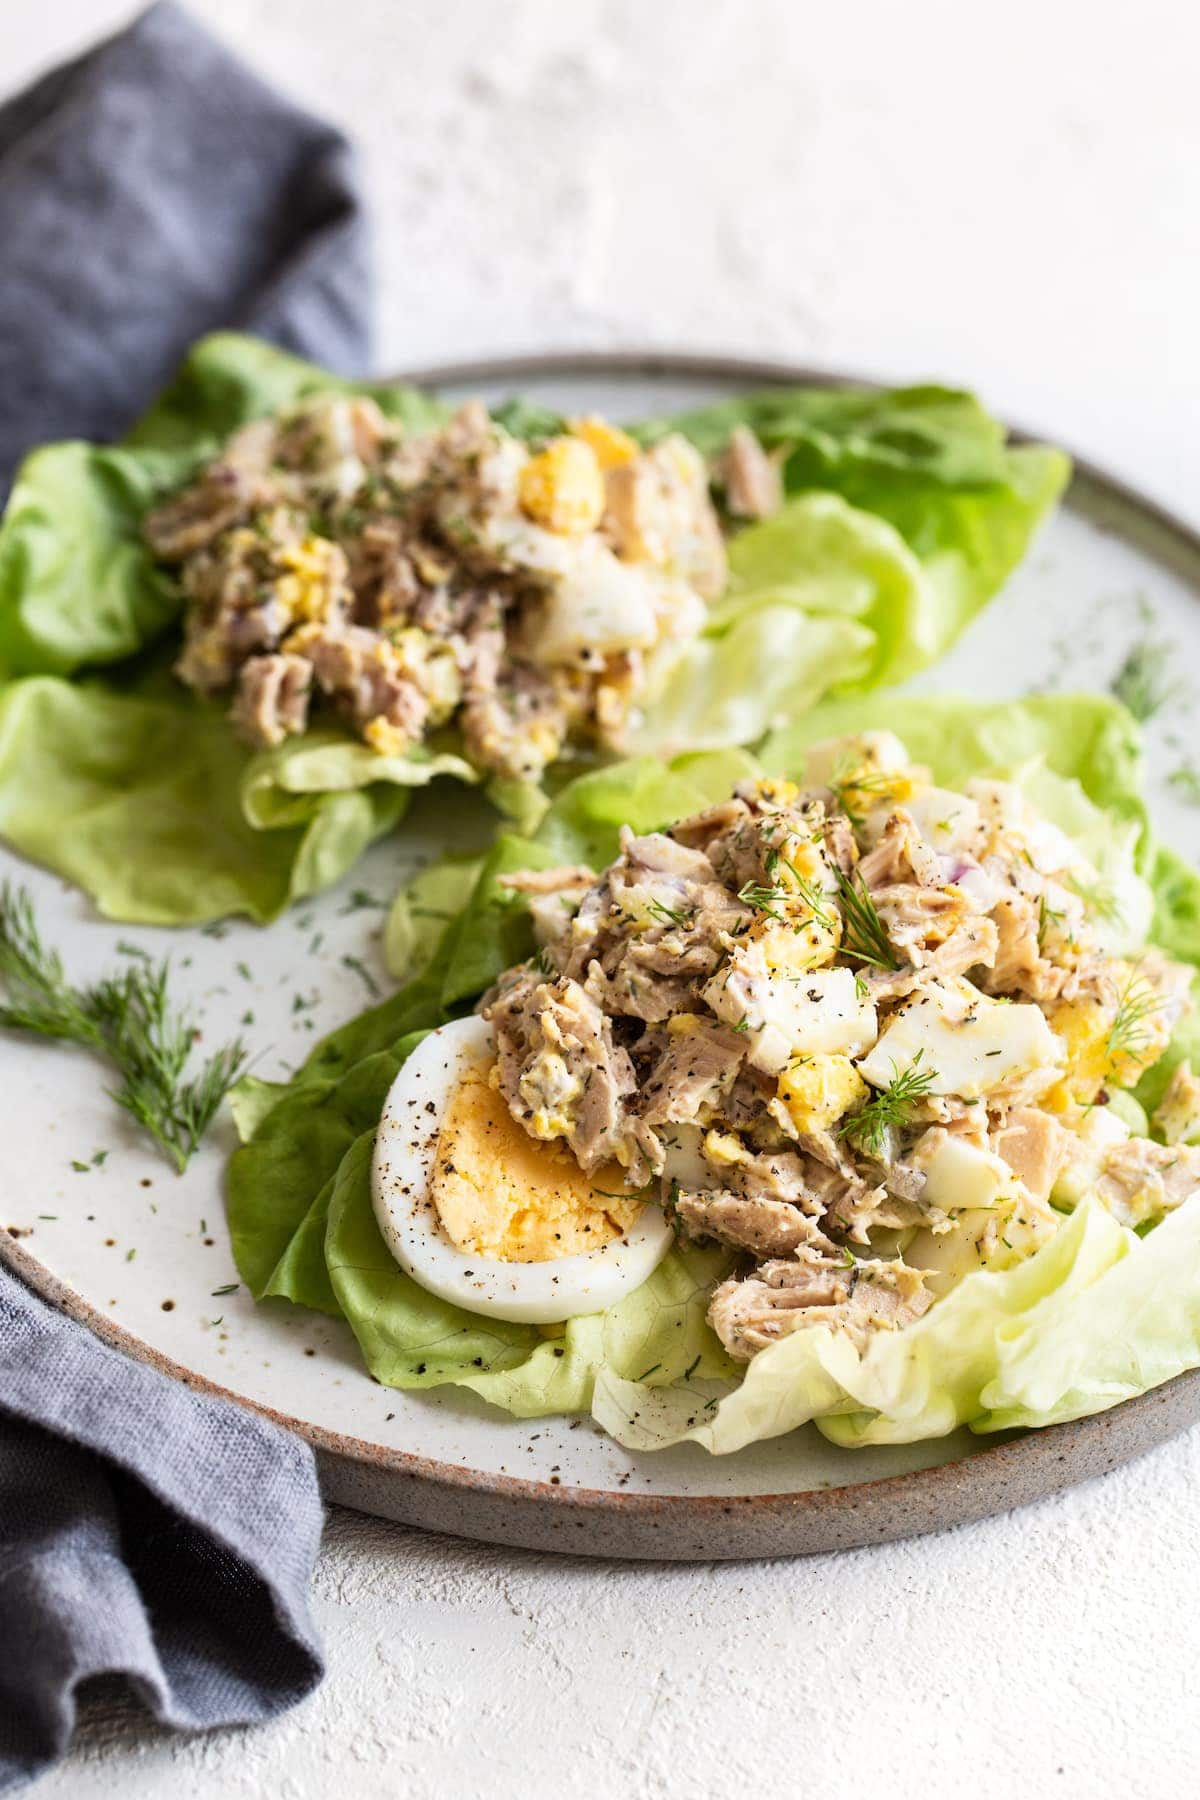 Egg-Free Tuna Salad Recipe: How to Create a Delicious Meal without Eggs